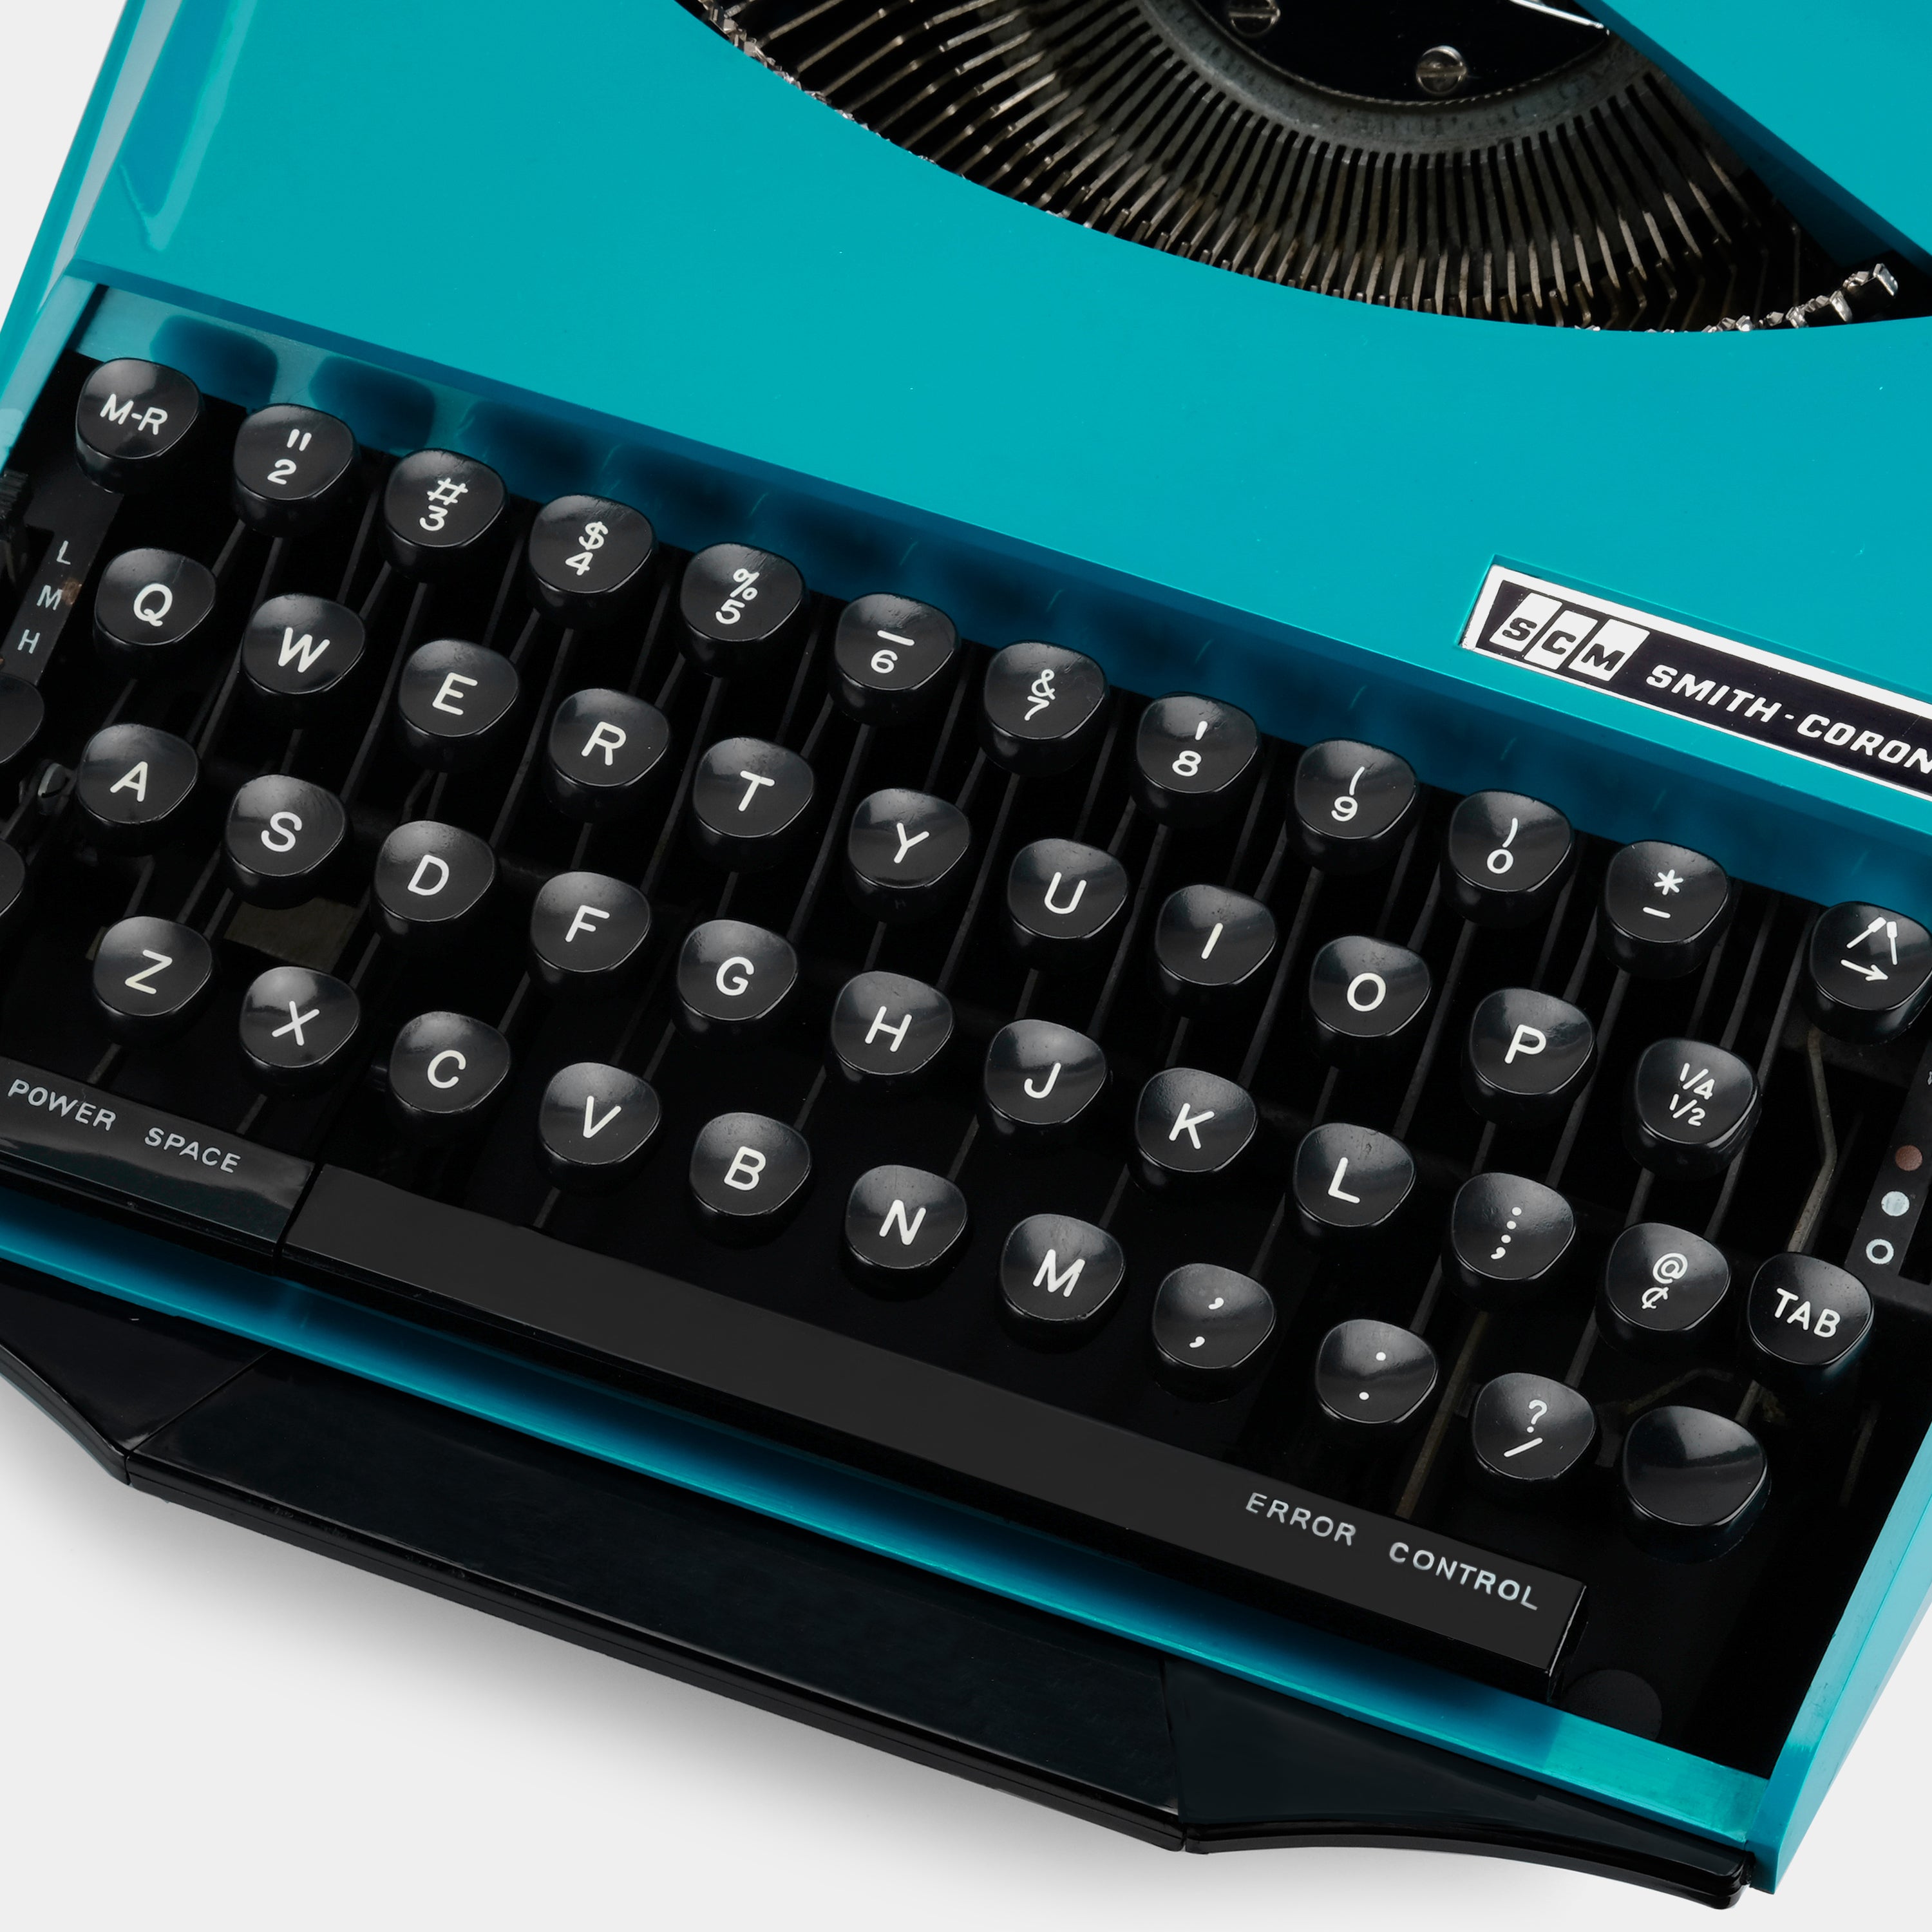 Smith-Corona Design by Ghia Turquoise Manual Typewriter and Case